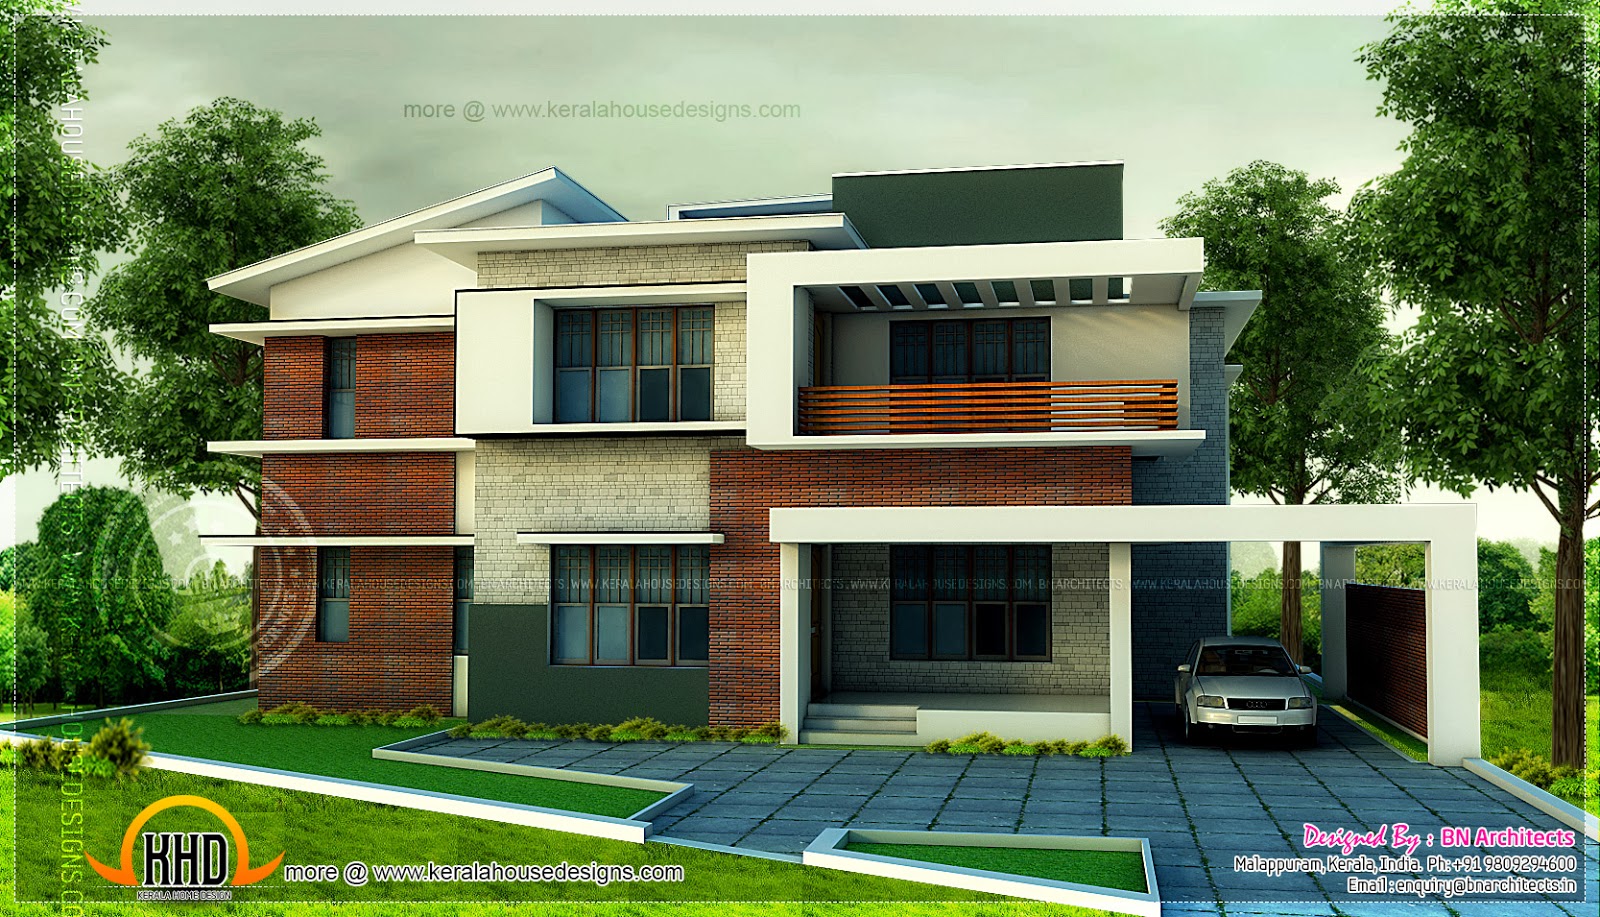  House  Plans  5  Bedroom  modern home  in 3440 Sq feet 